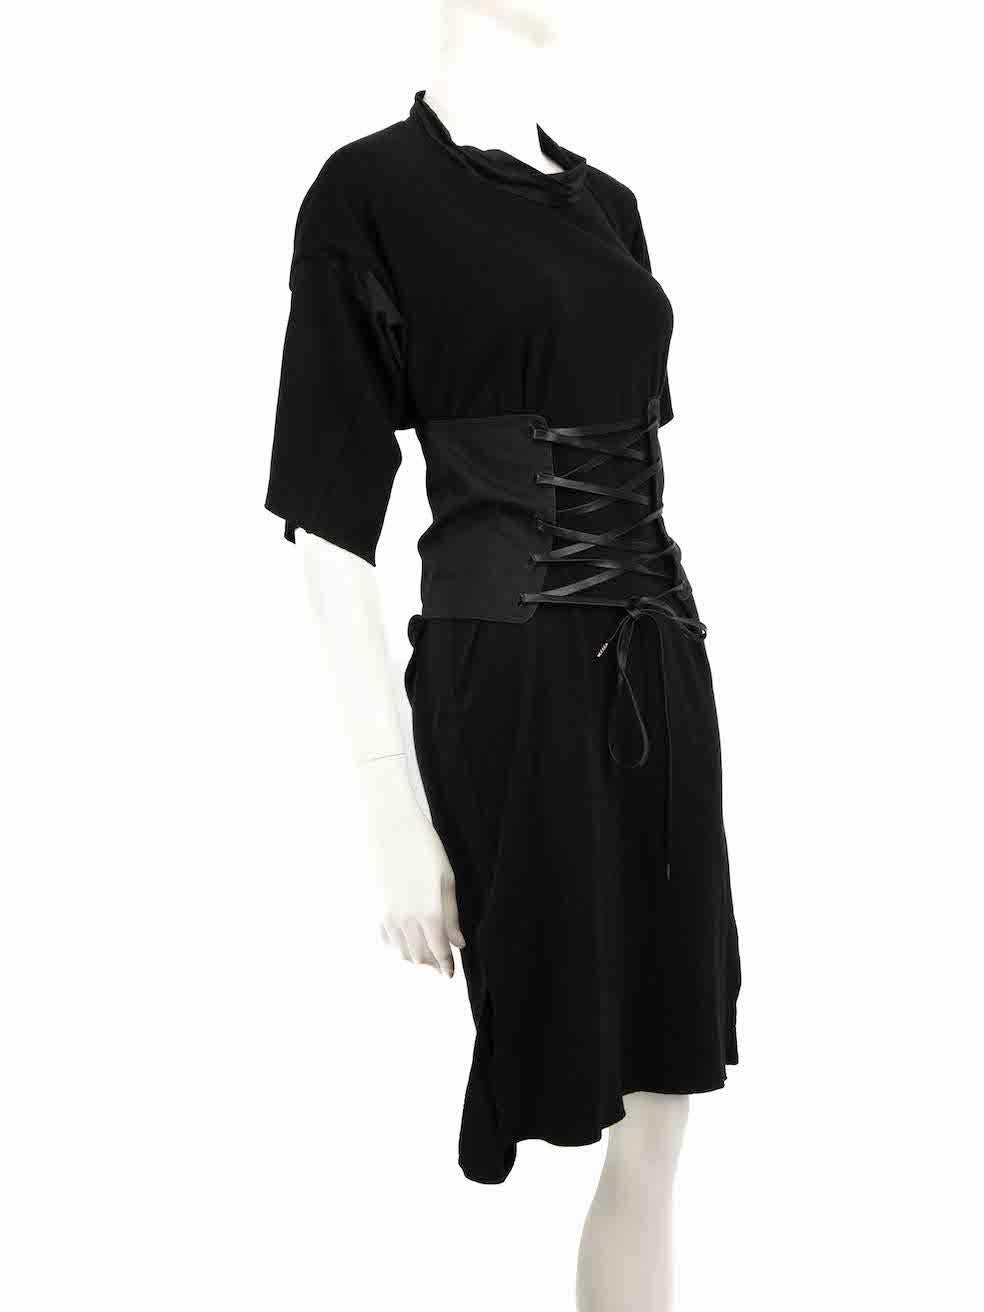 CONDITION is Very good. Hardly any visible wear to dress is evident on this used Vivienne West Wood Anglomania designer resale item.
 
 
 
 Details
 
 
 Black
 
 Cotton
 
 Dress
 
 Short sleeves
 
 Round neck
 
 Knee length
 
 Waist corset detail
 
